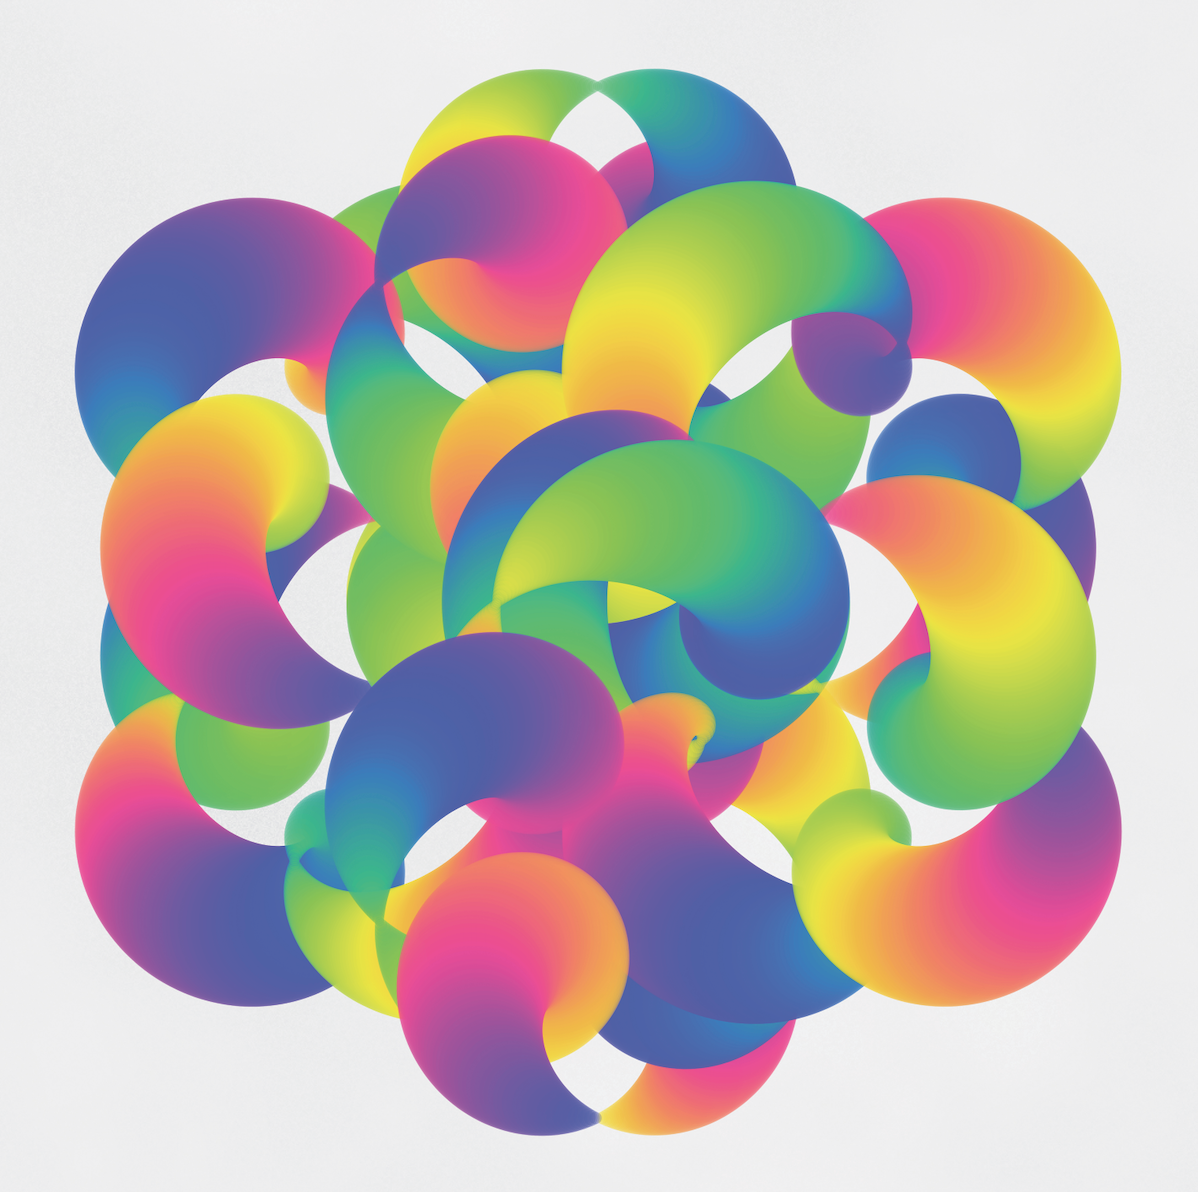 Circular shape made up of smaller swirling shapes filled in with rainbow gradients.